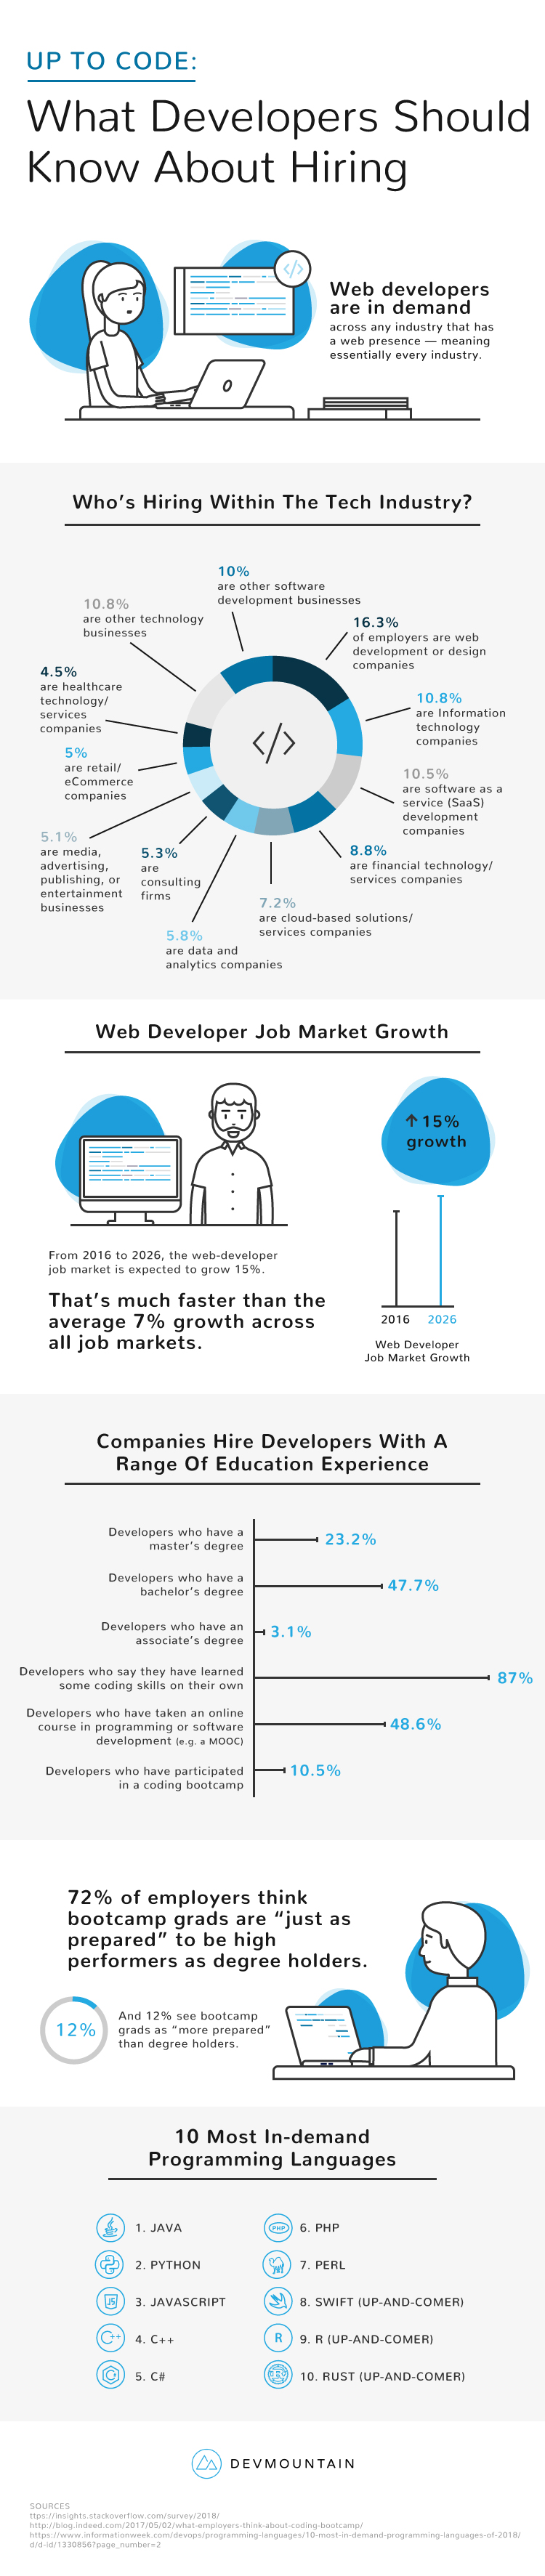 Infographic: What Developers Should Know About Hiring